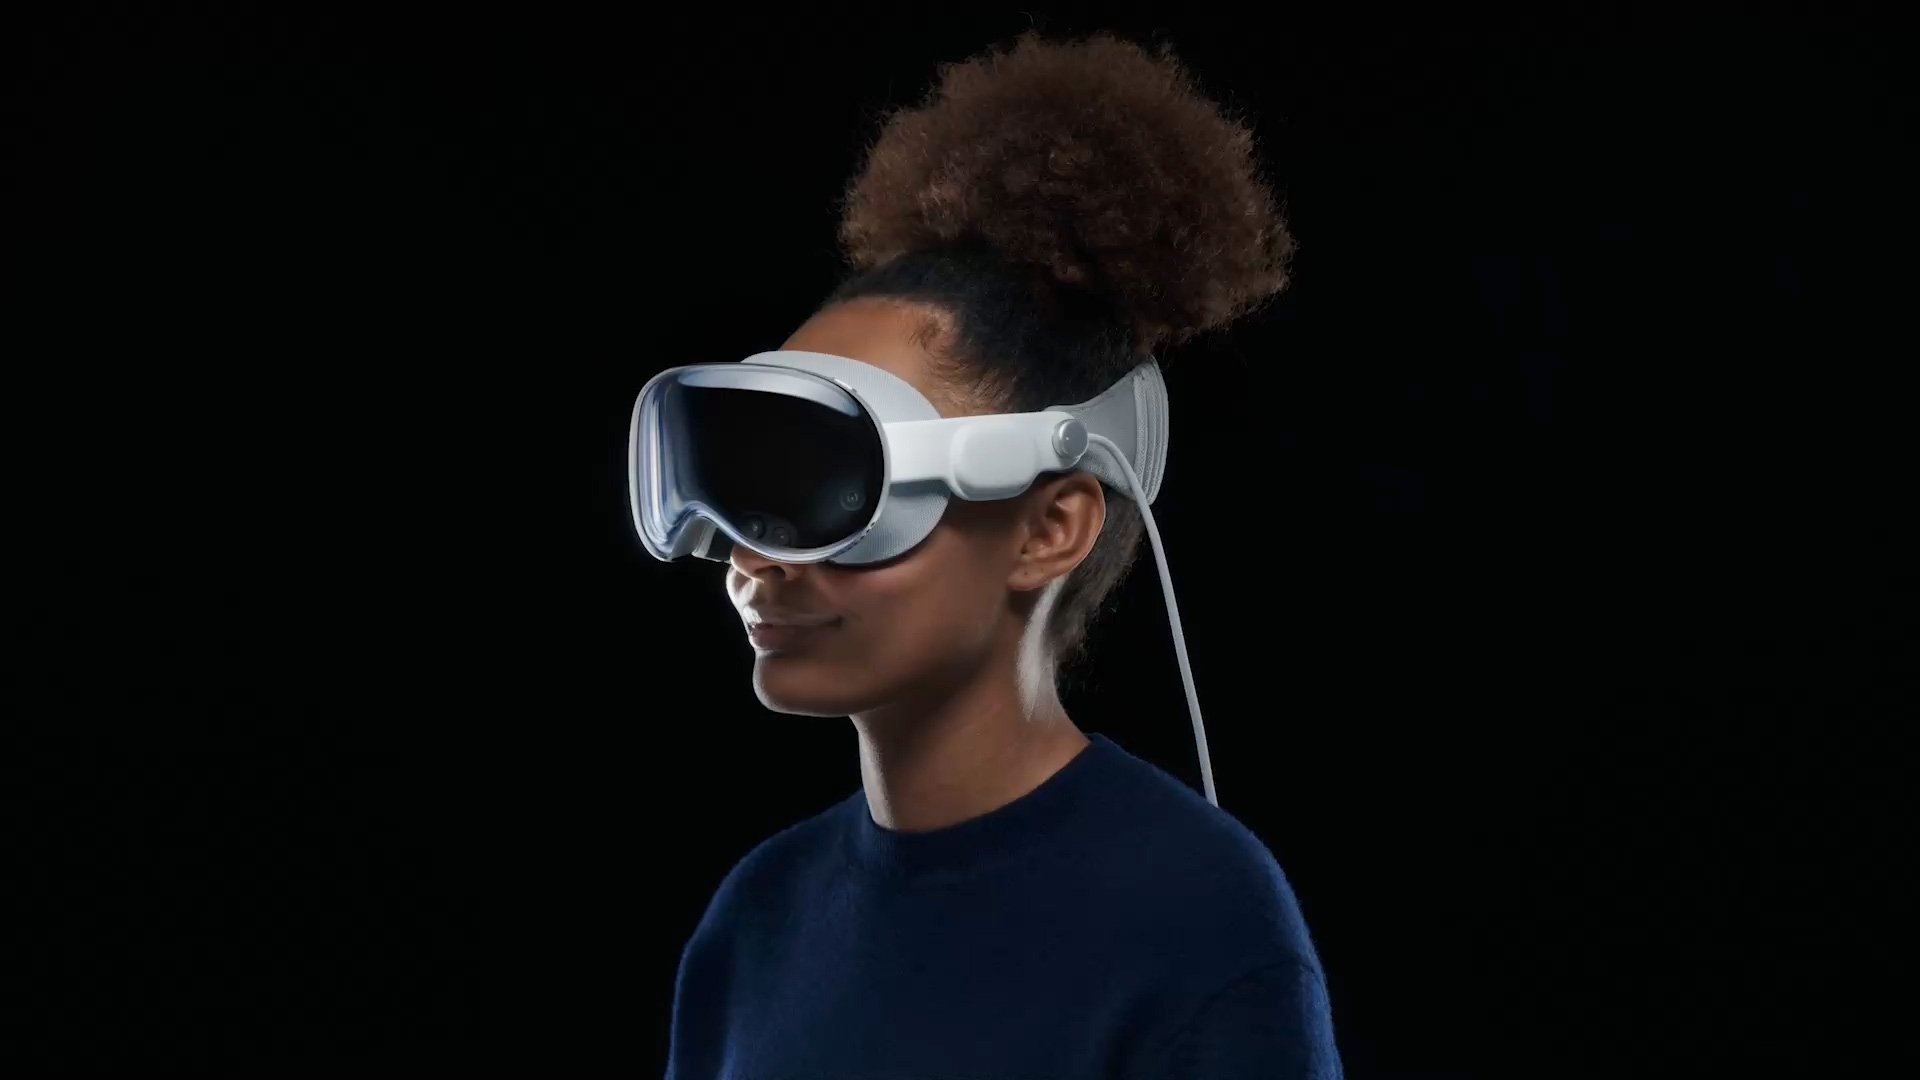 Meta unveils its much-hyped Quest Pro mixed reality headset